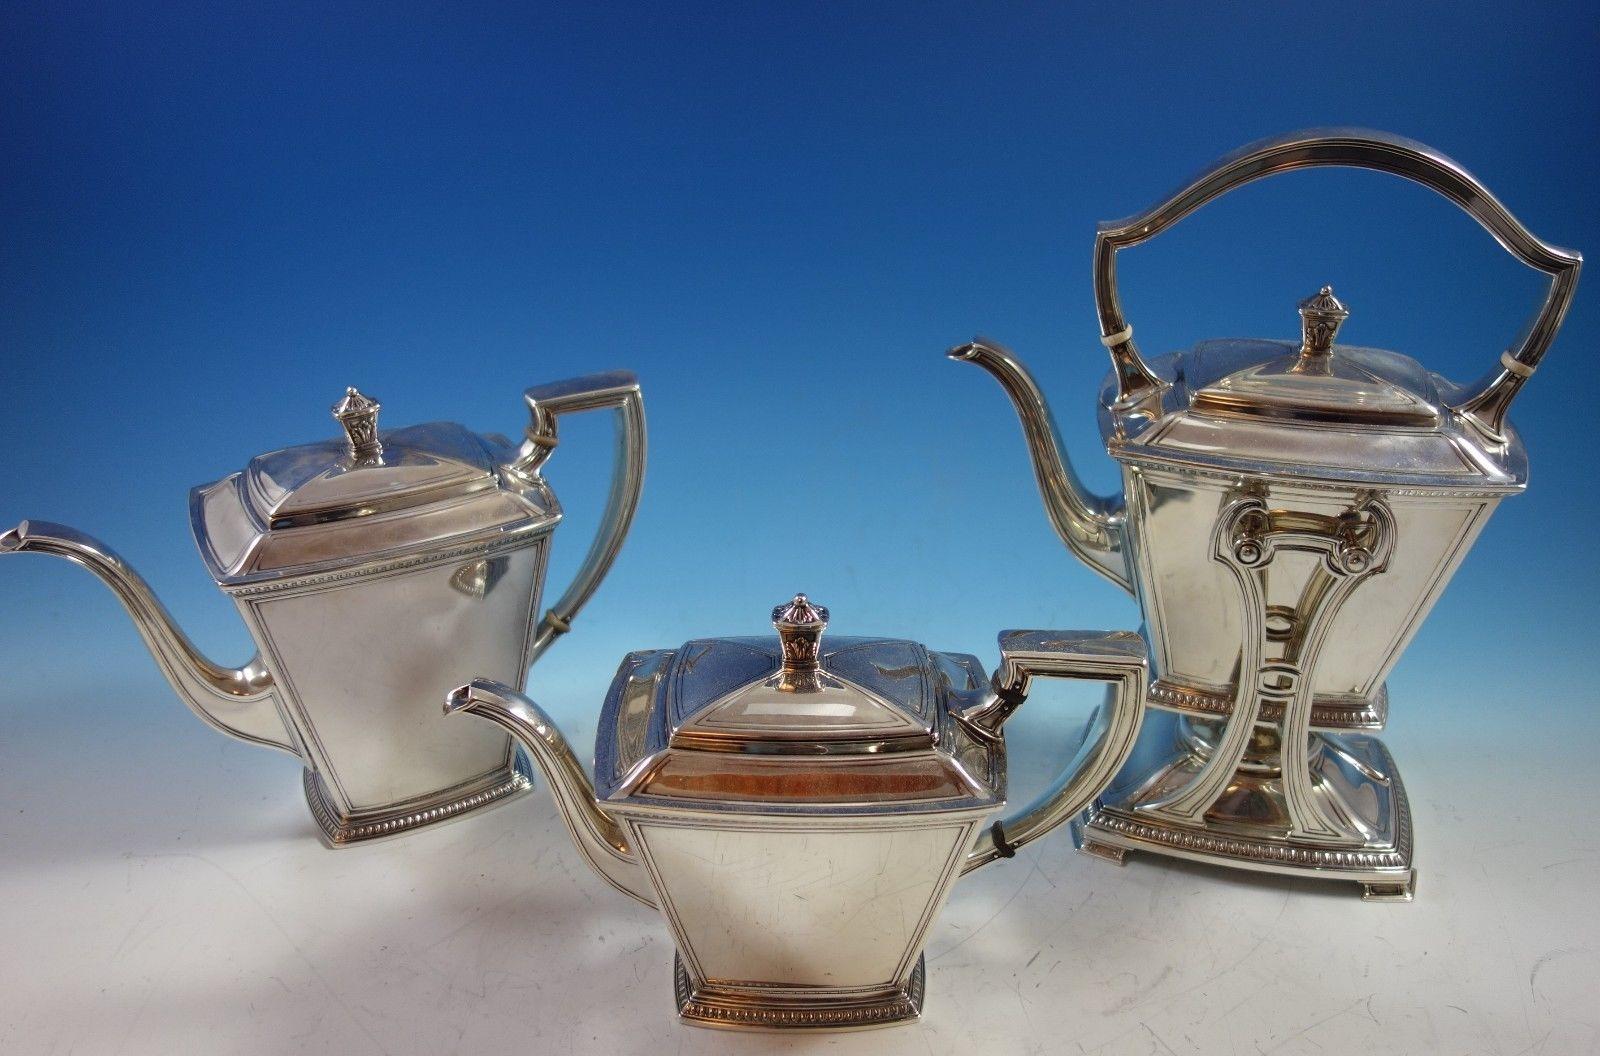 Superb Pantheon by International sterling silver 5-piece tea set with tray. 

This set includes: 
1 - Kettle on stand: Marked with #5600-8, it weighs 49.63 ozt., and it measures 12 1/2 x 9 1/4 . 

1 - Coffee pot: Marked with #5607, it weighs 27